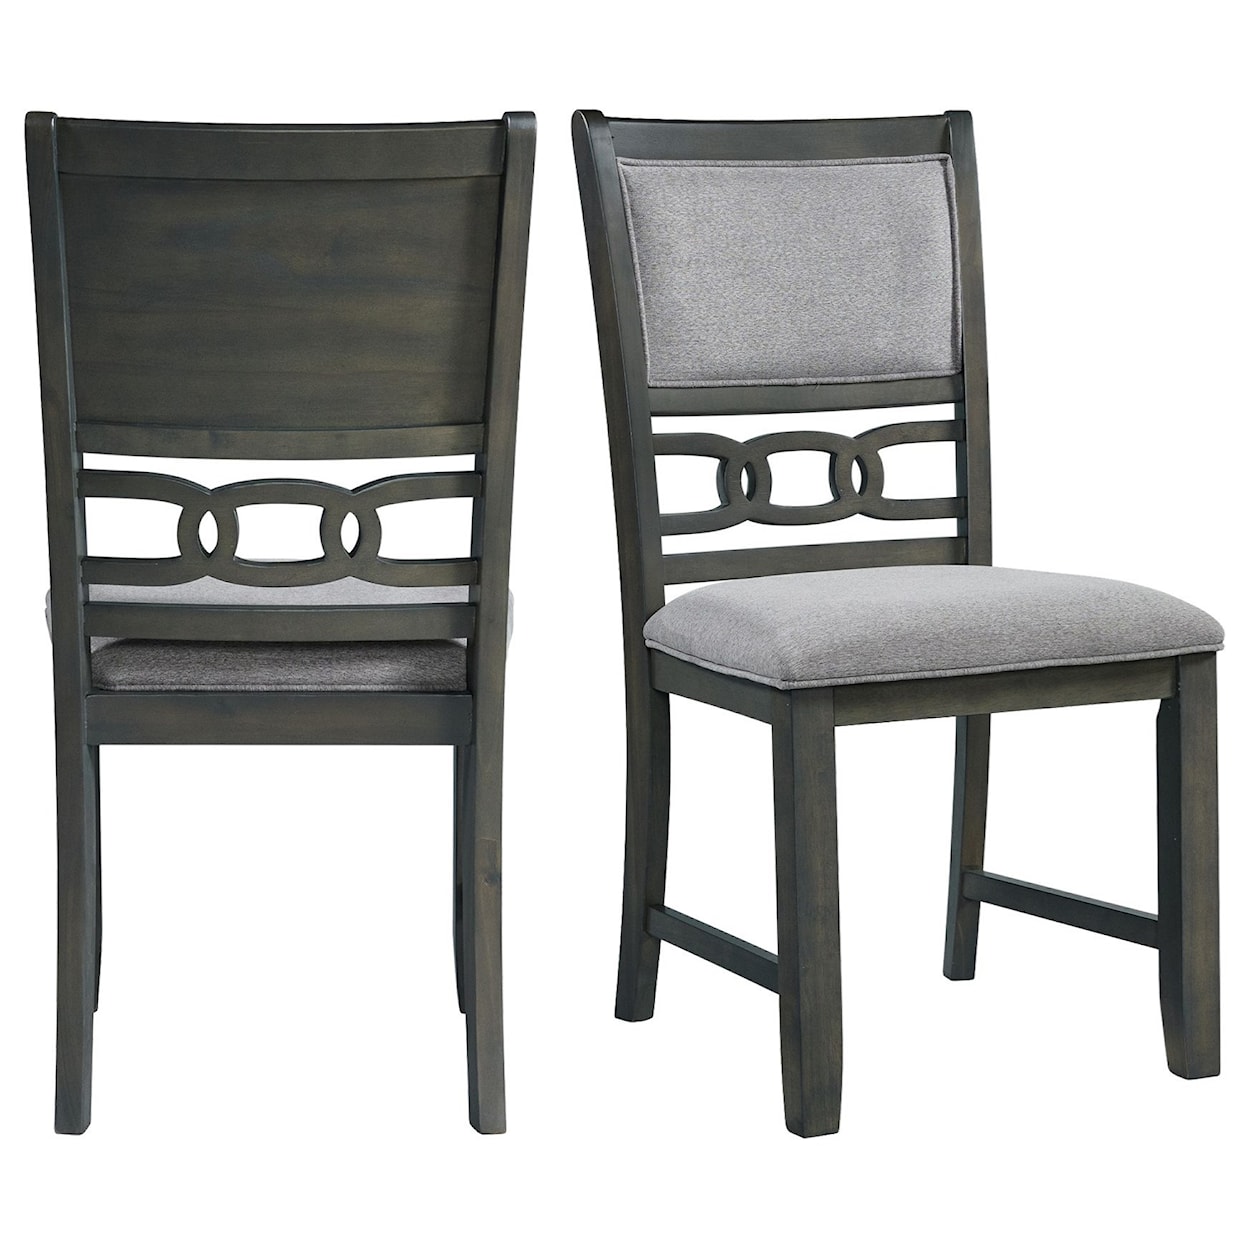 Elements Amherst Set of 2 Standard Height Side Chairs